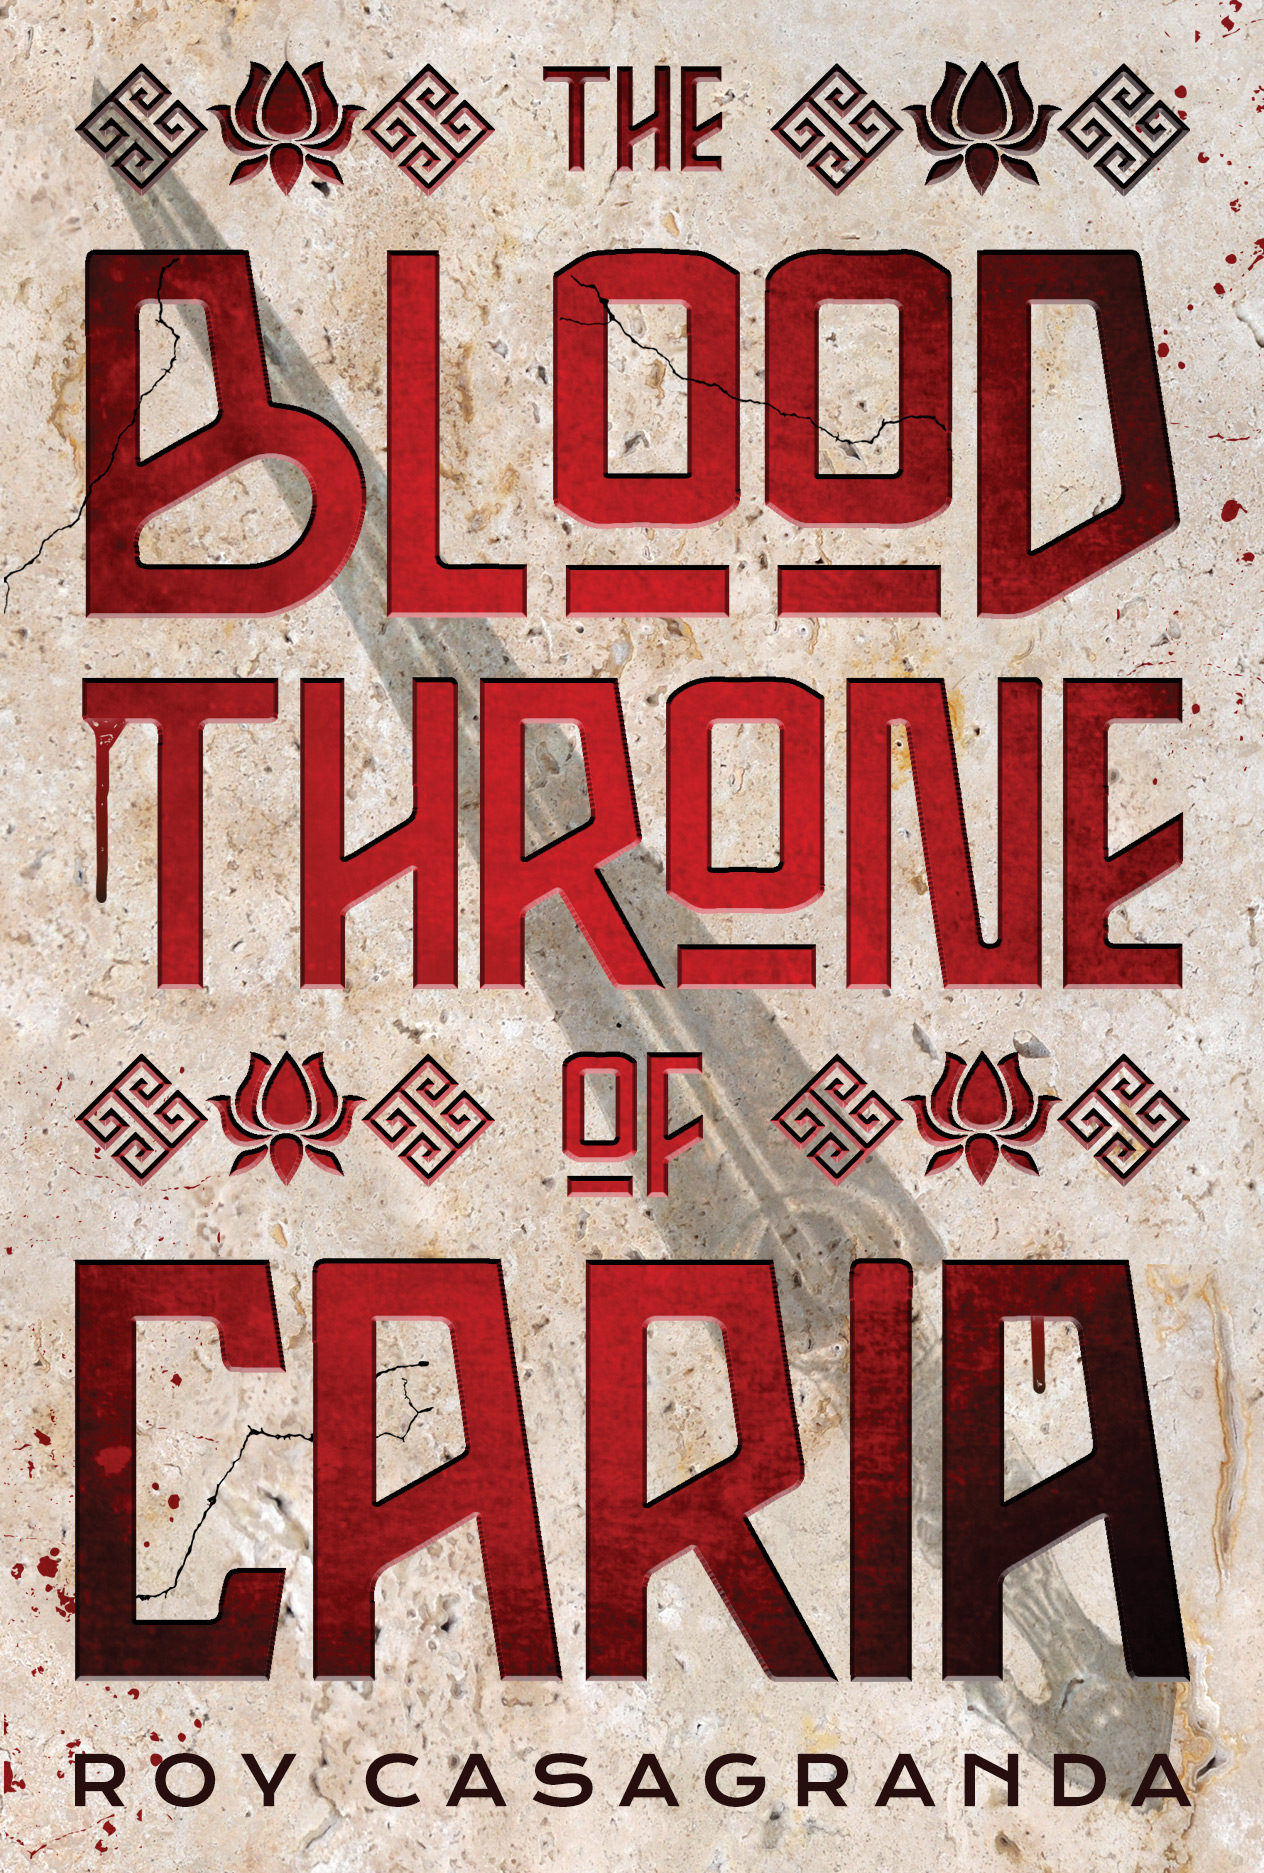 The Blood Throne of Caria